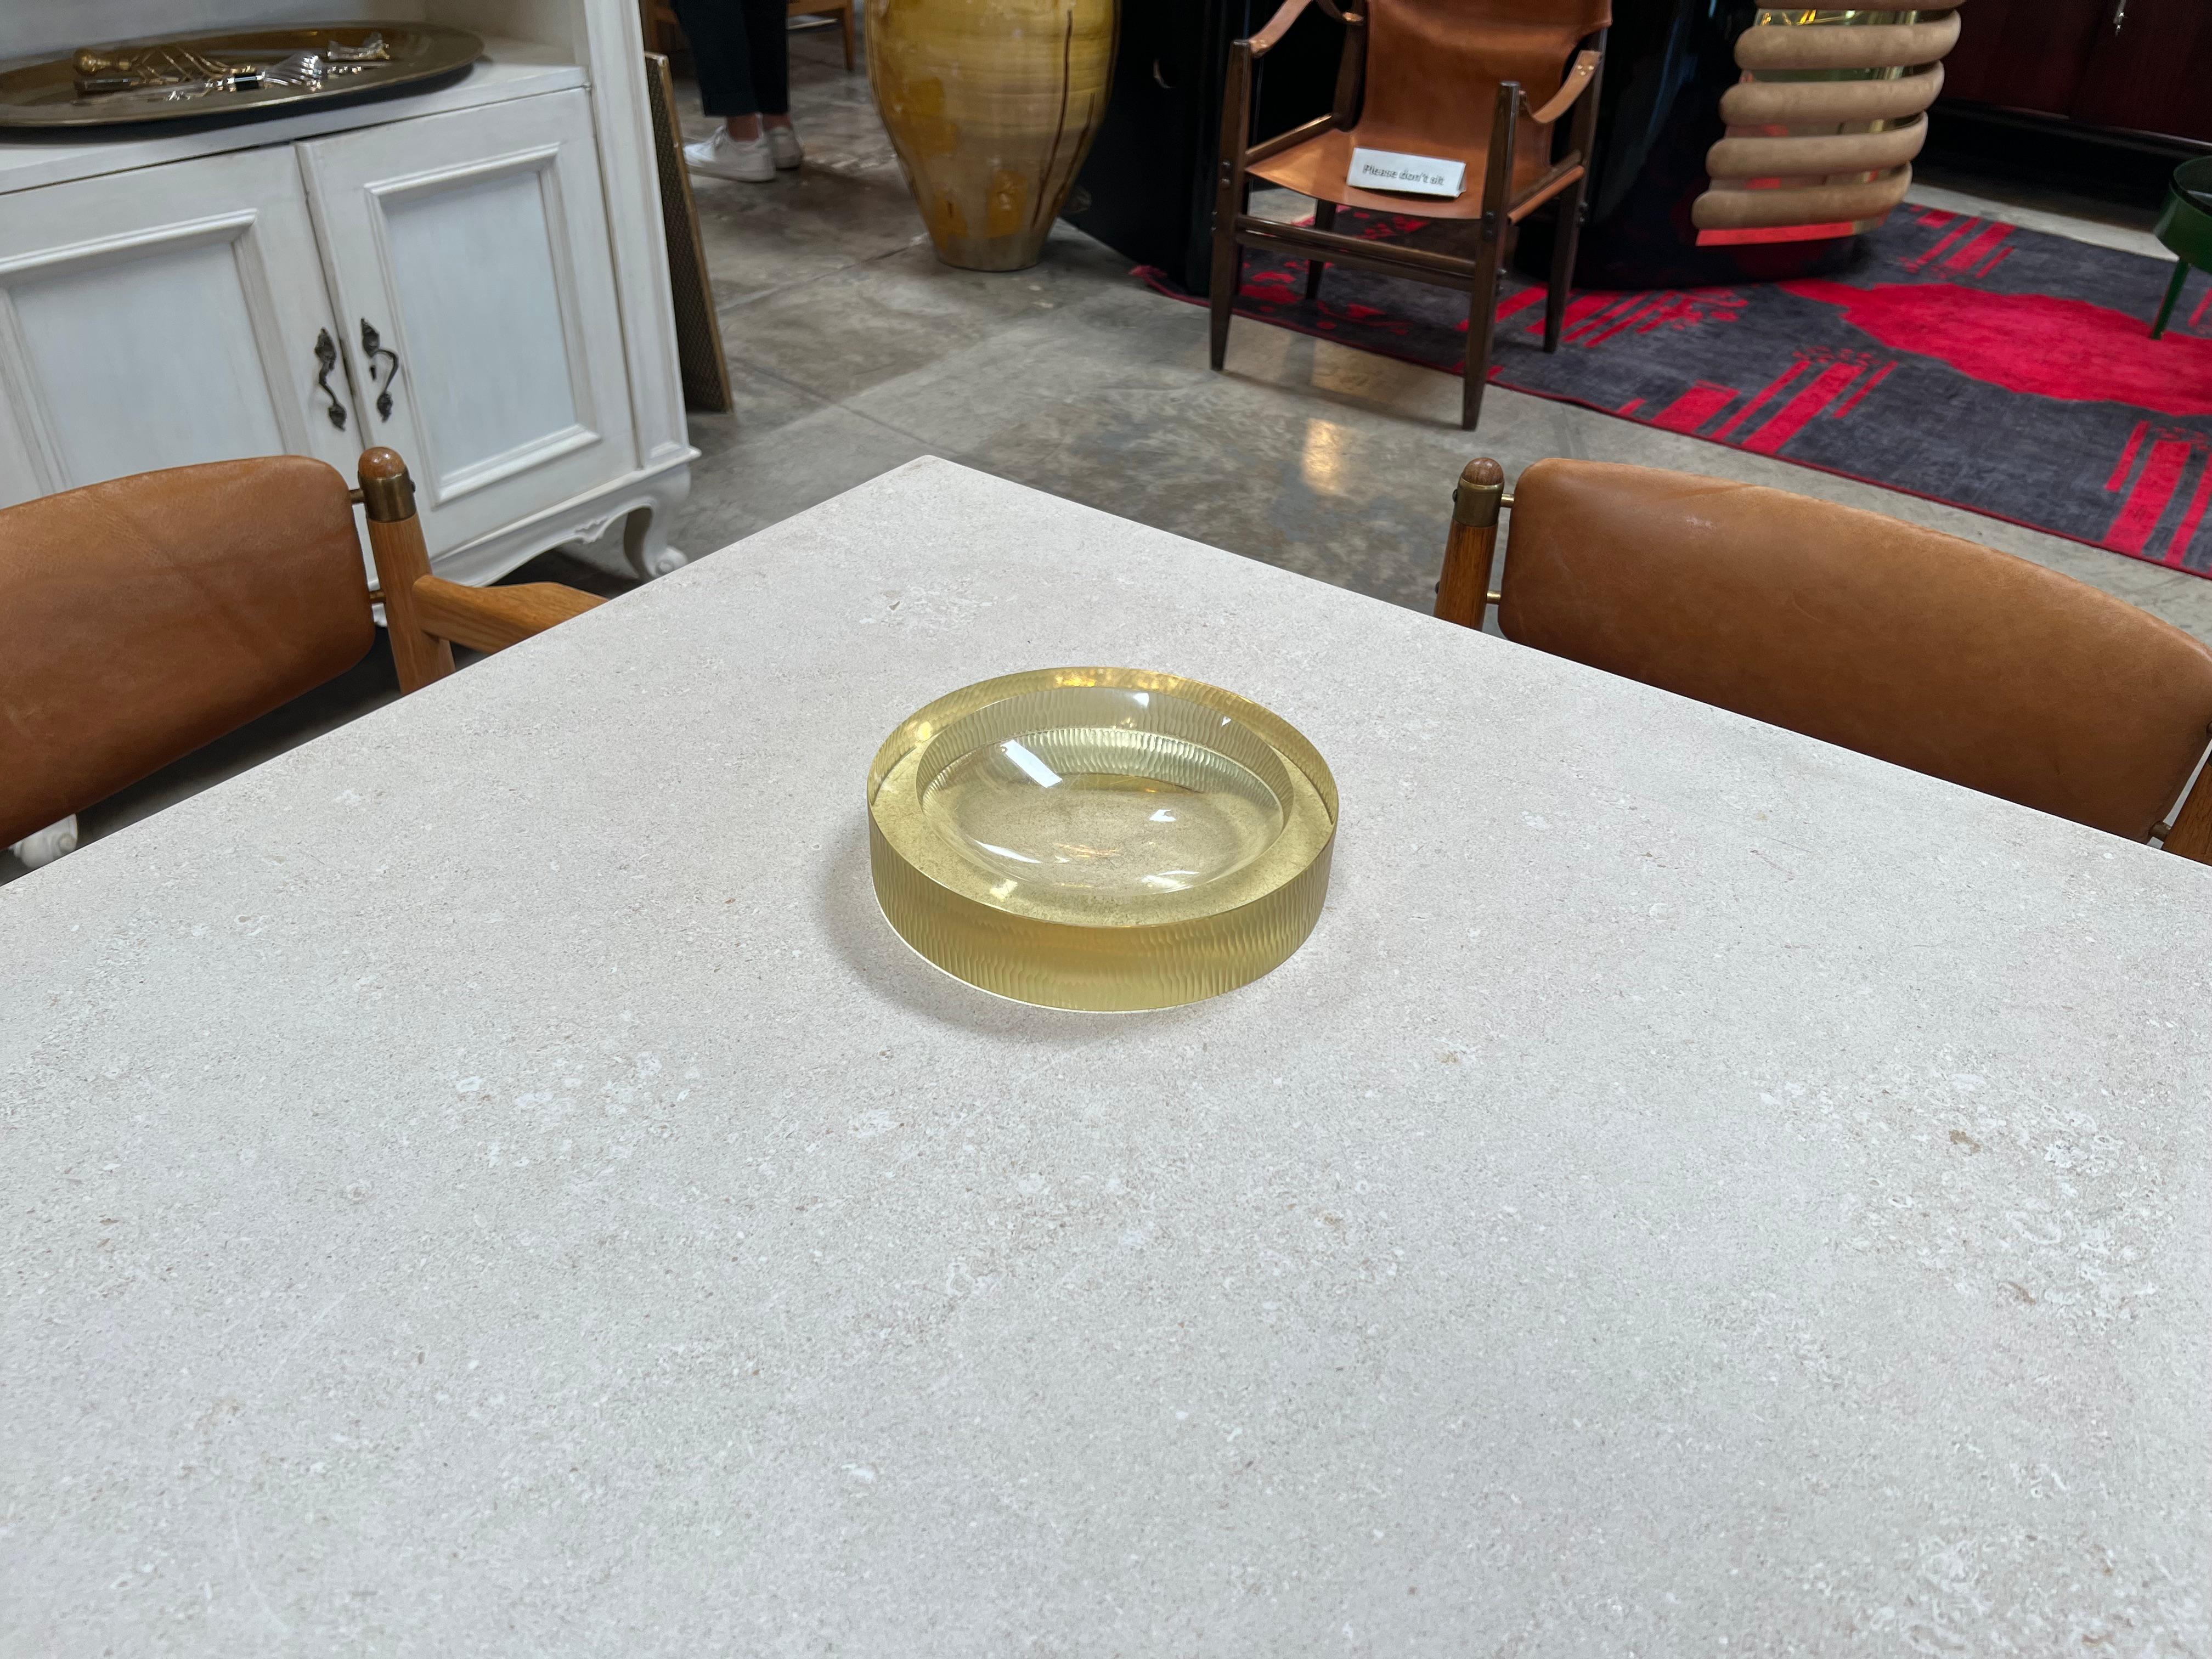 The Vintage Italian Decorative Round Glass Bowl from the 1970s is a charming piece that encapsulates the era's design aesthetics. Made in Italy, this bowl features a round and elegant form, showcasing the beauty of glass craftsmanship. Its vintage